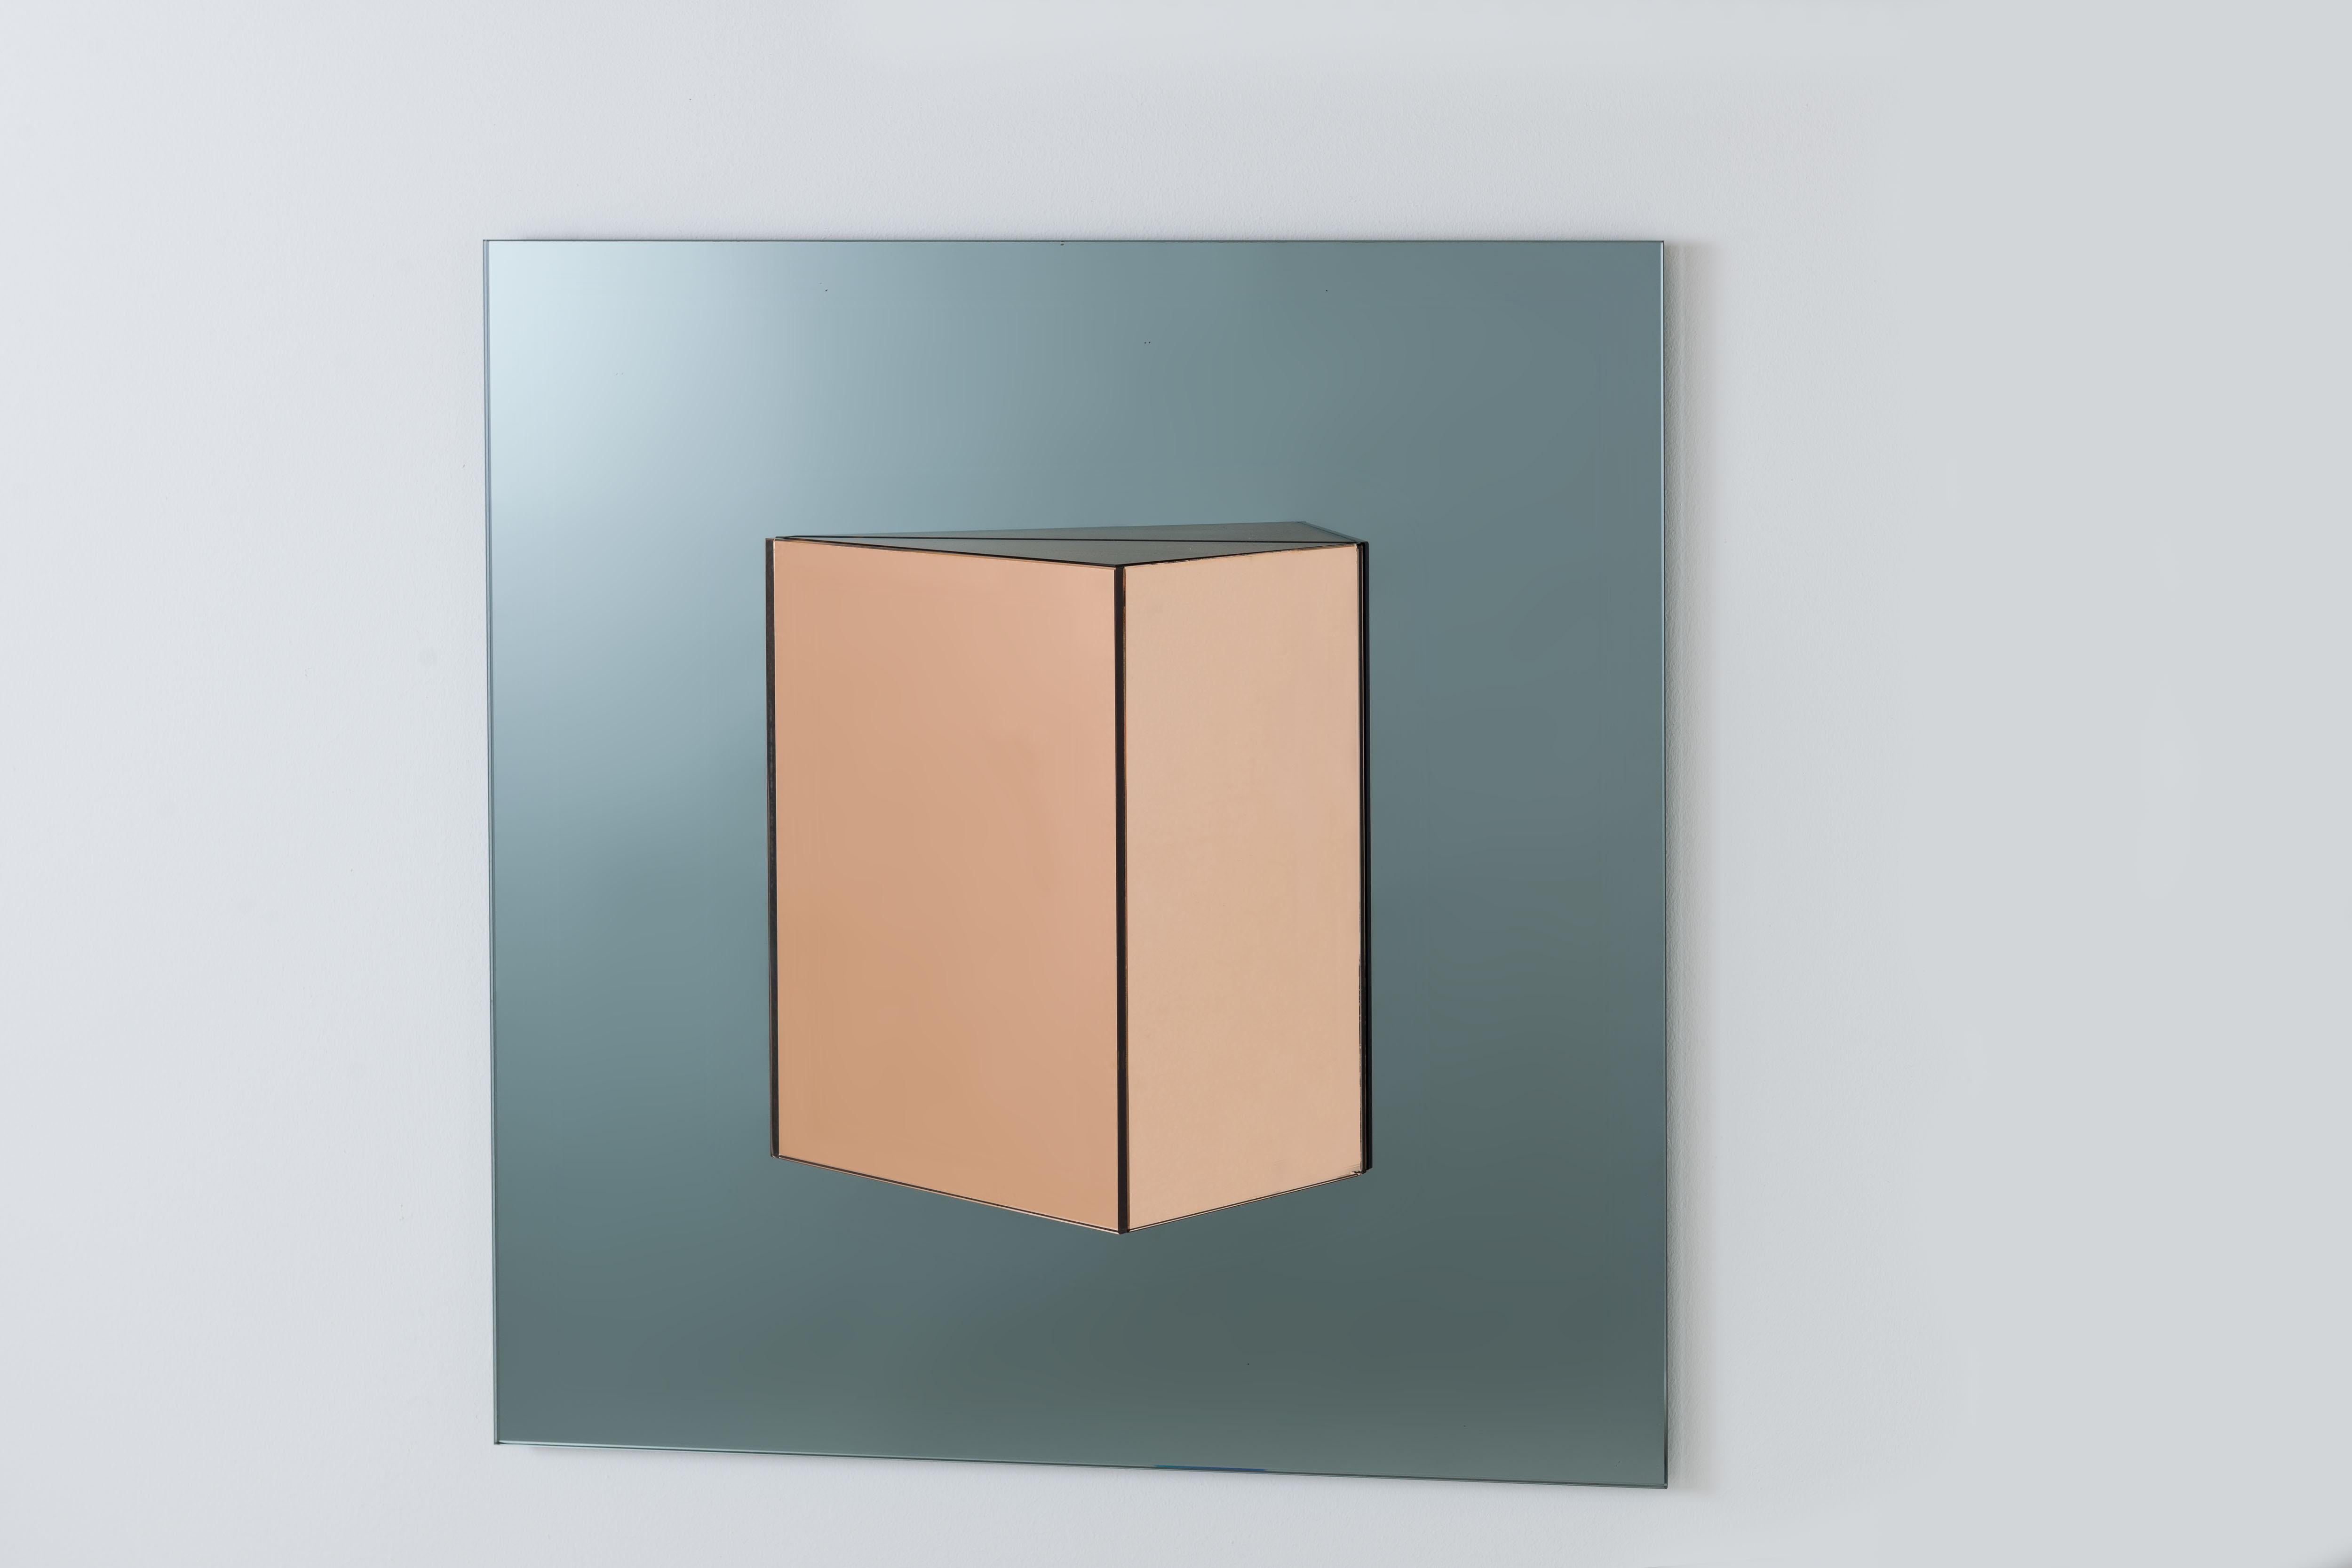 Abstract wall sculpture model 'Von 3125' by Italian designer Giuseppe Raimondo for Cristal Art Italy. Object is executed from smoke grey colored glass and copper colored glass.
This is a very strong and powerful piece that works fantastic in a